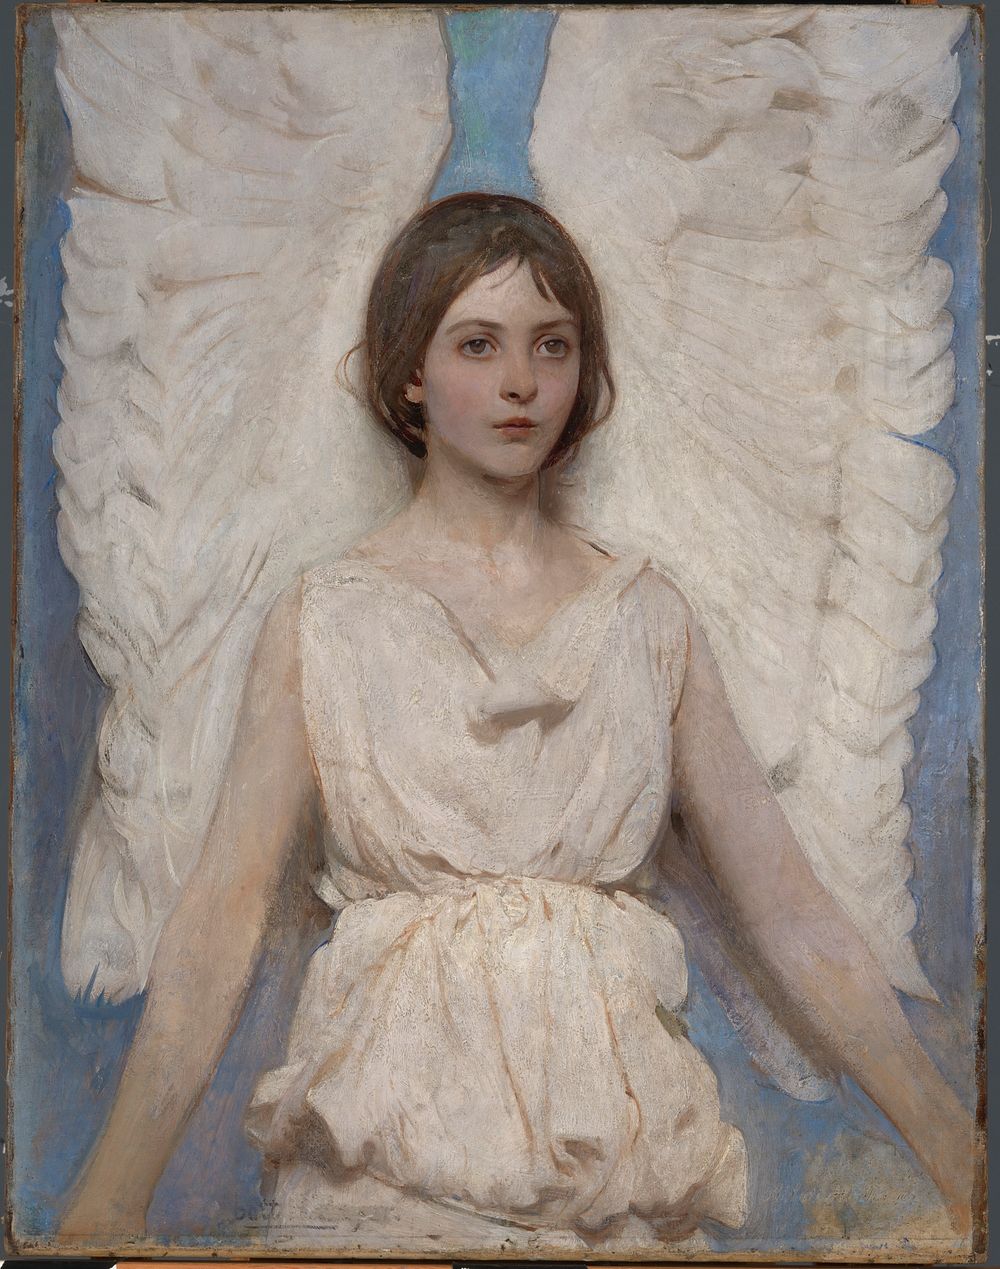 Angel (1887) painting in high resolution by Abbott Handerson Thayer.  